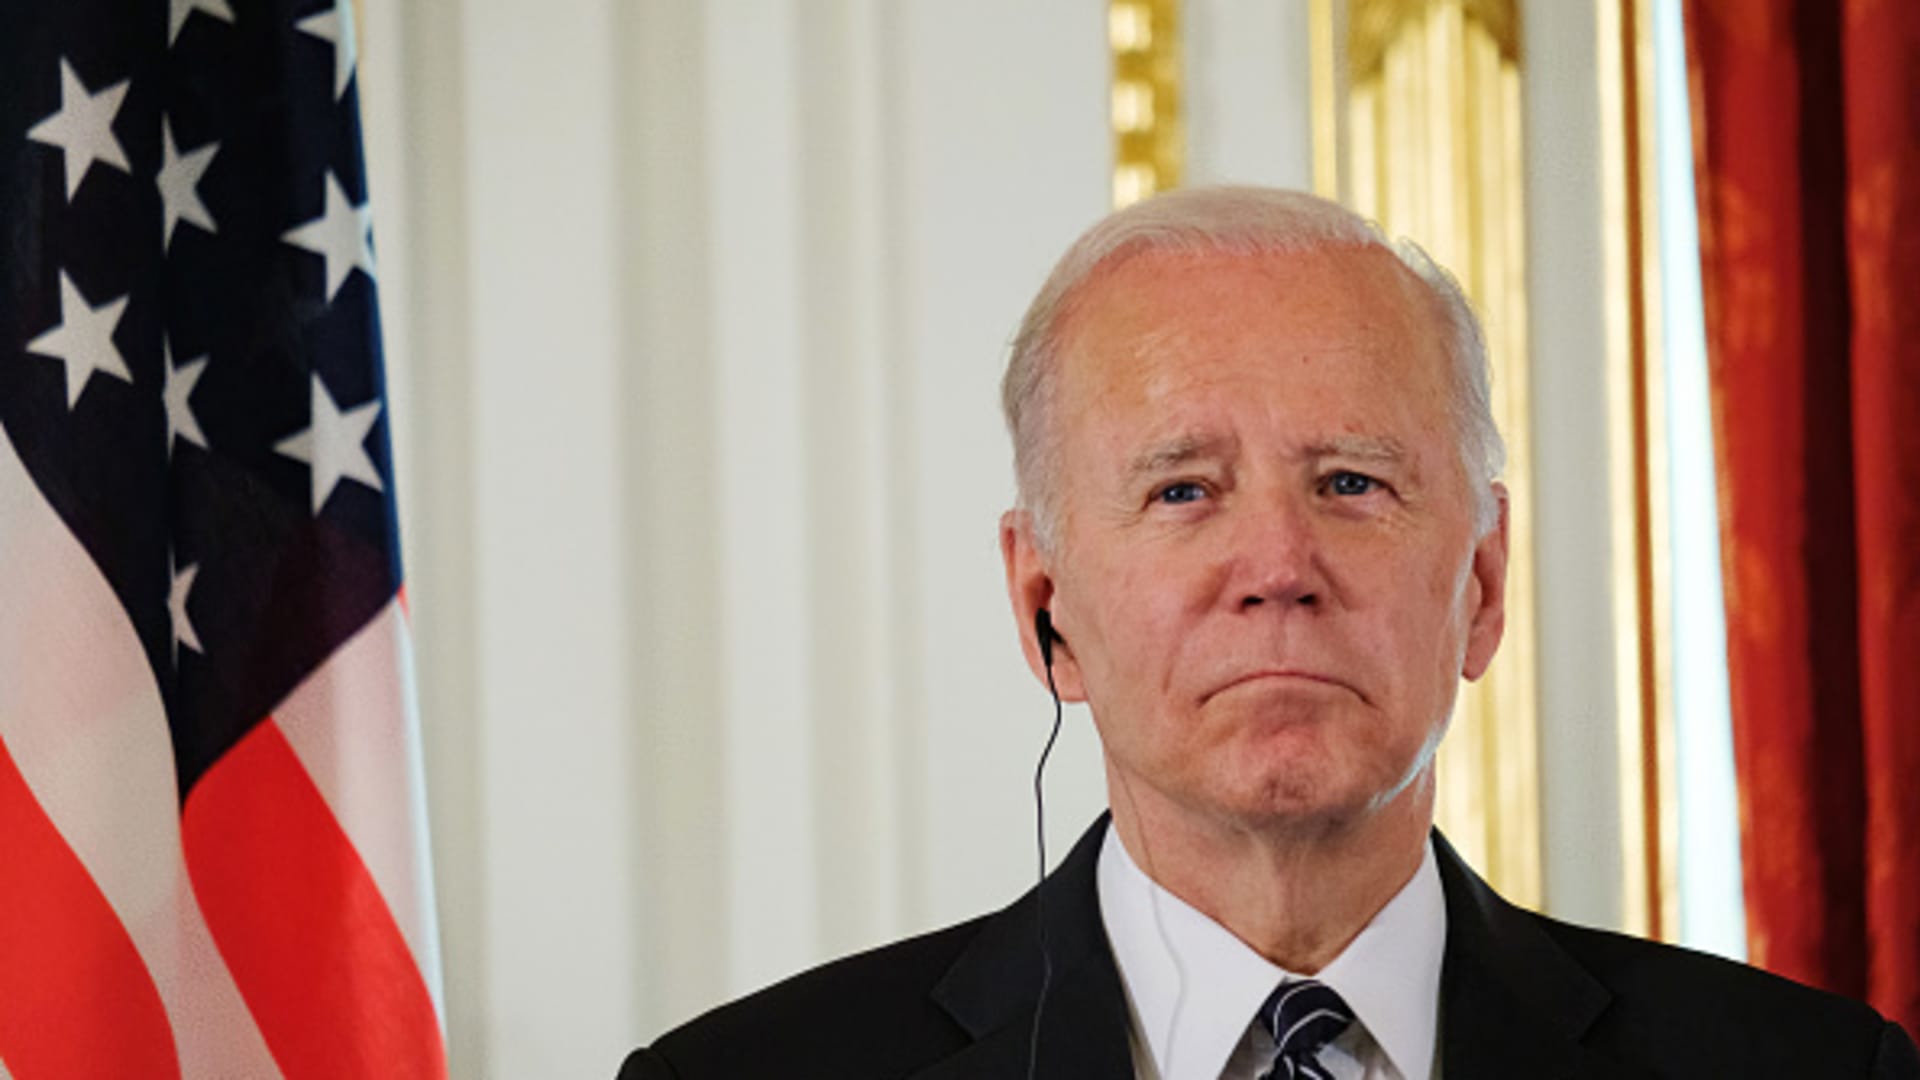 Biden says U.S. willing to use force to defend Taiwan — prompting backlash from China